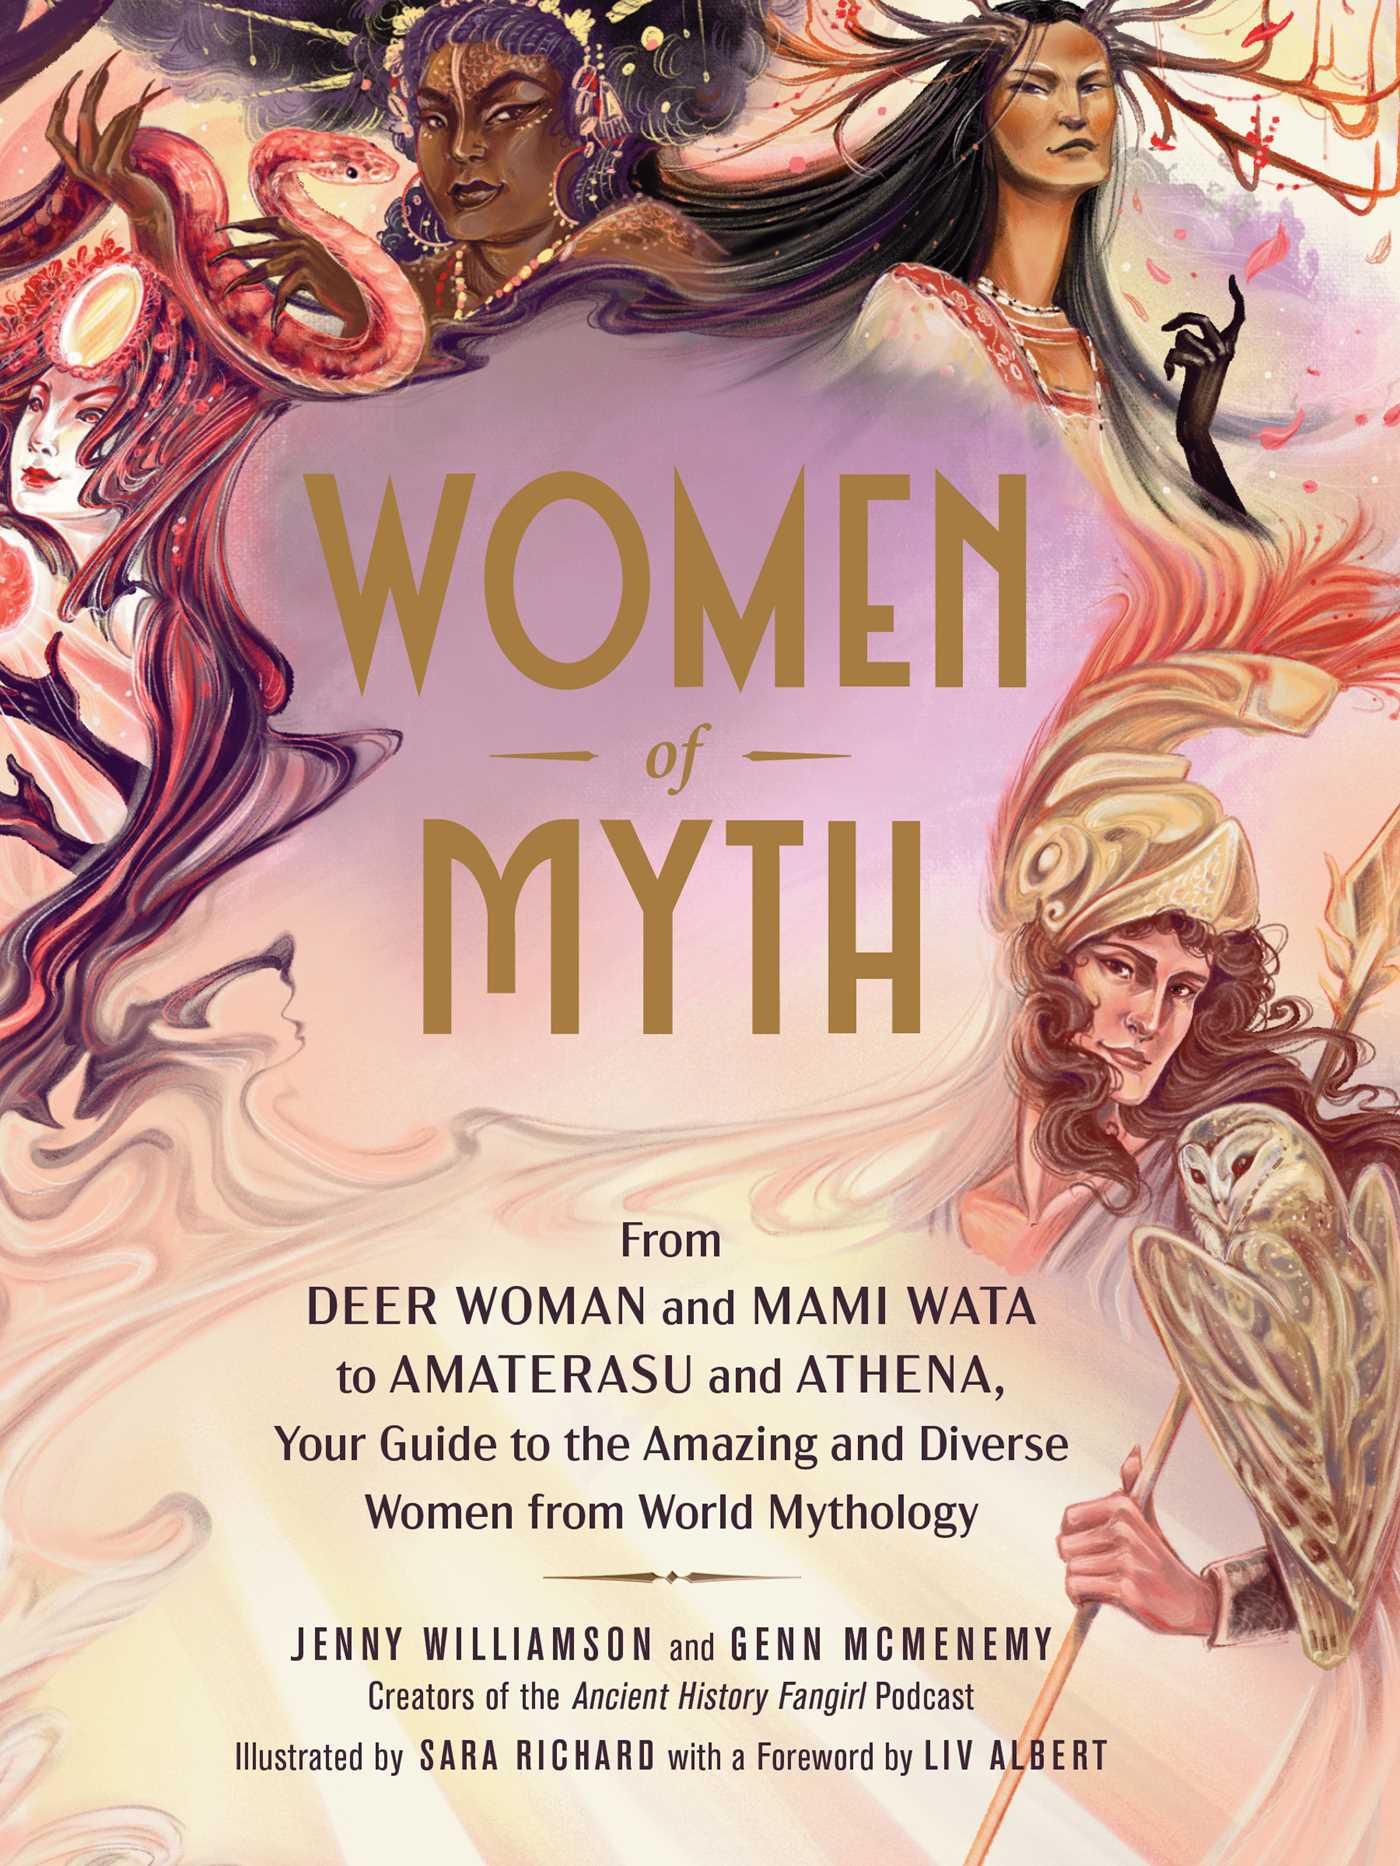 Women of Myth : From Deer Woman and Mami Wata to Amaterasu and Athena, Your Guide to the Amazing and Diverse Women from World Mythology | Williamson, Jenny (Auteur) | McMenemy, Genn (Auteur) | Richard, Sara (Illustrateur)